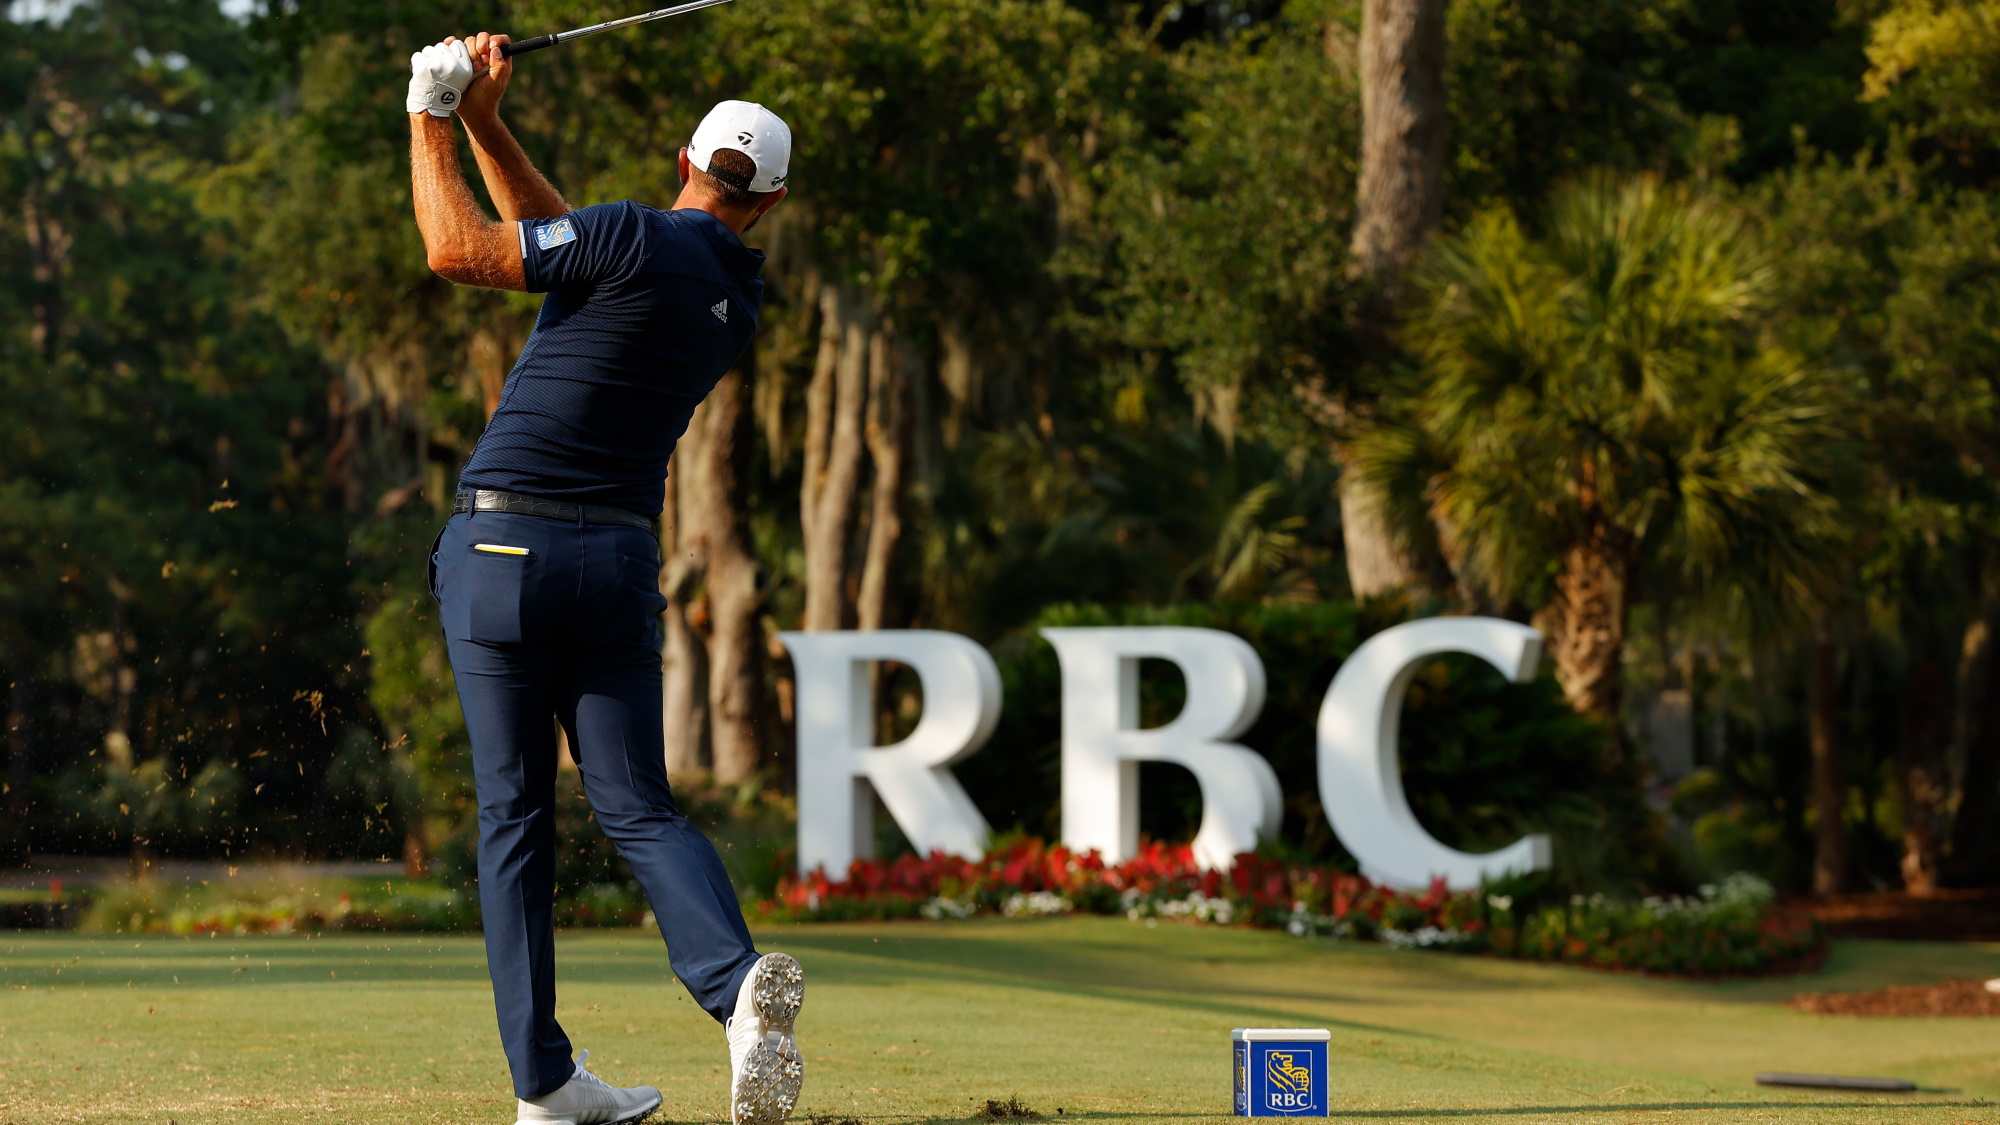 How to watch RBC Heritage 2021 live stream PGA golf online from anywhere TechRadar